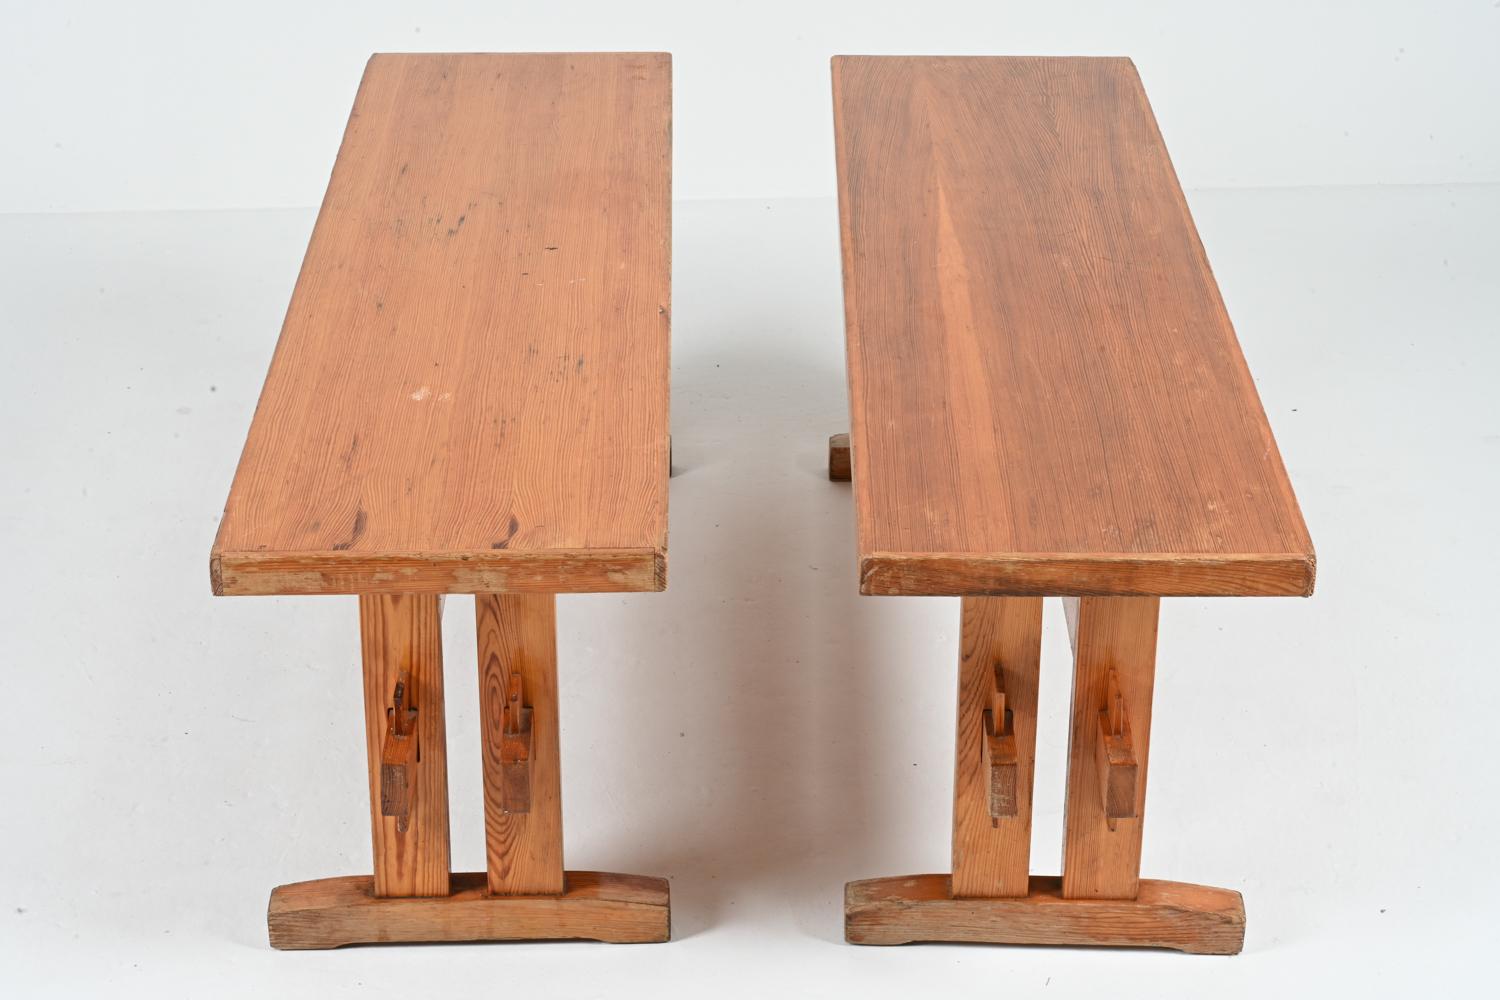 Pair of Solid Pine Benches Attributed to Sven Larsson, c. 1970's For Sale 9